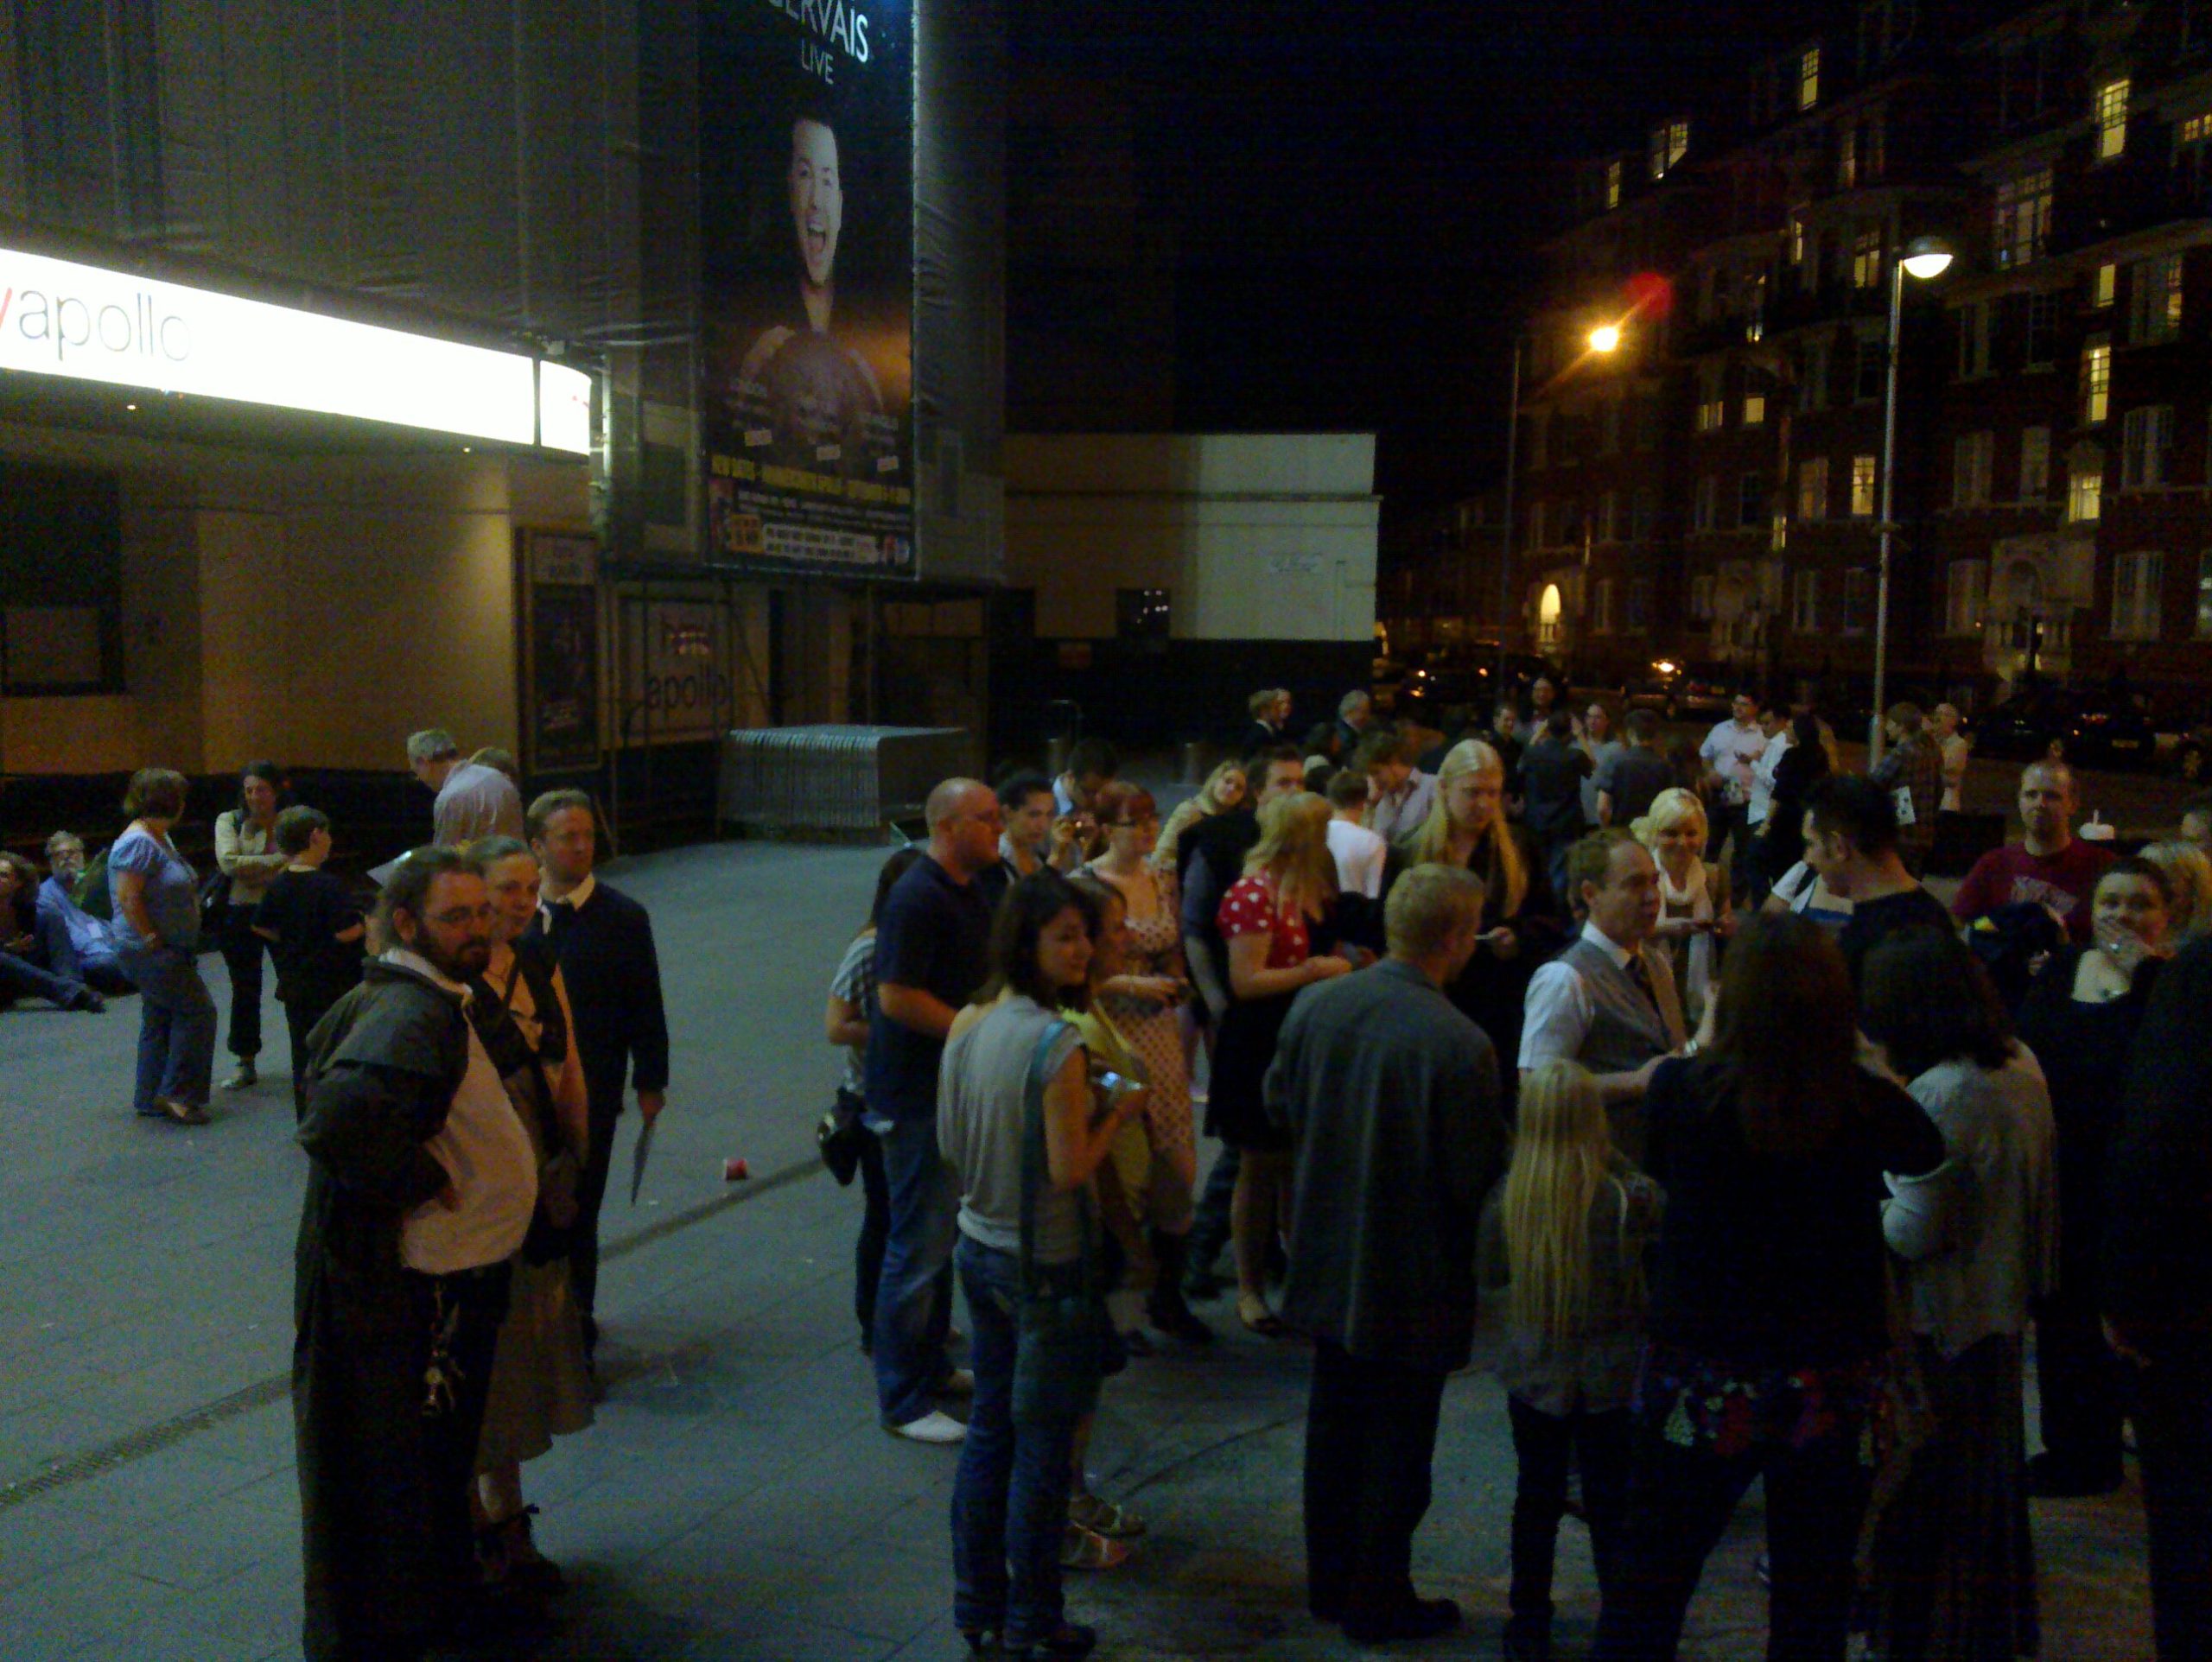 A crowd outside the theatre.